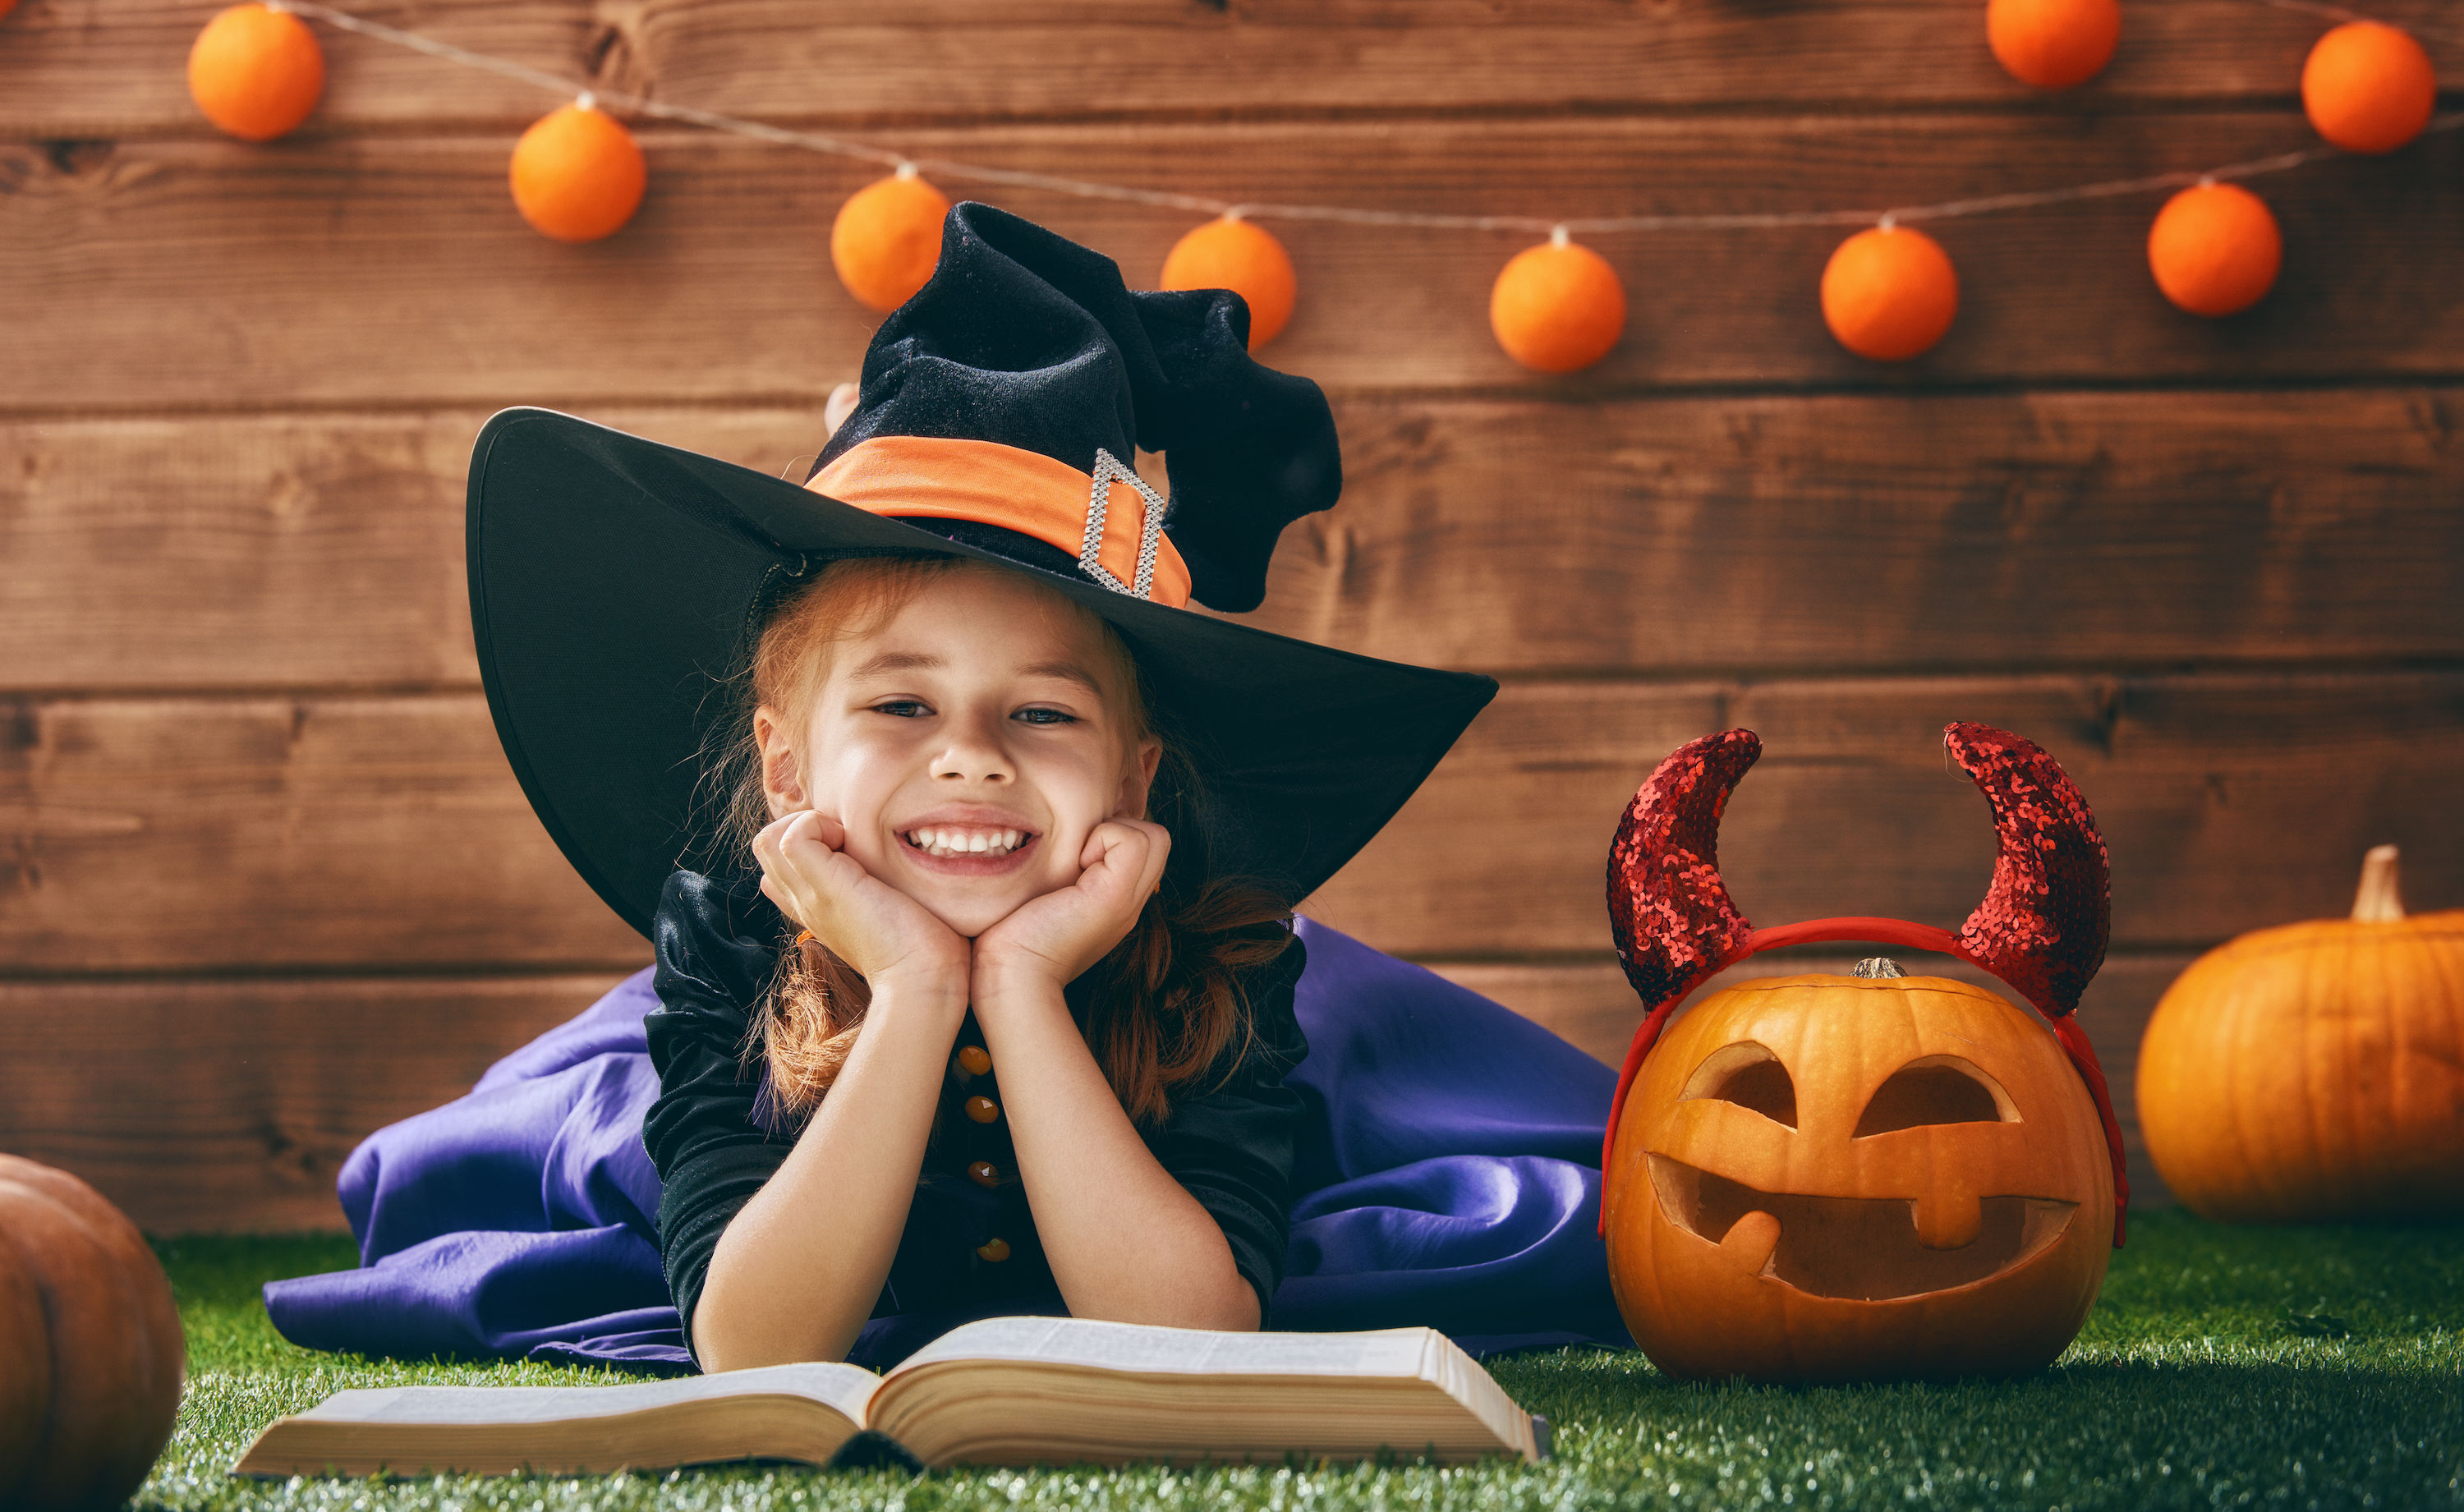 student in witch costume 